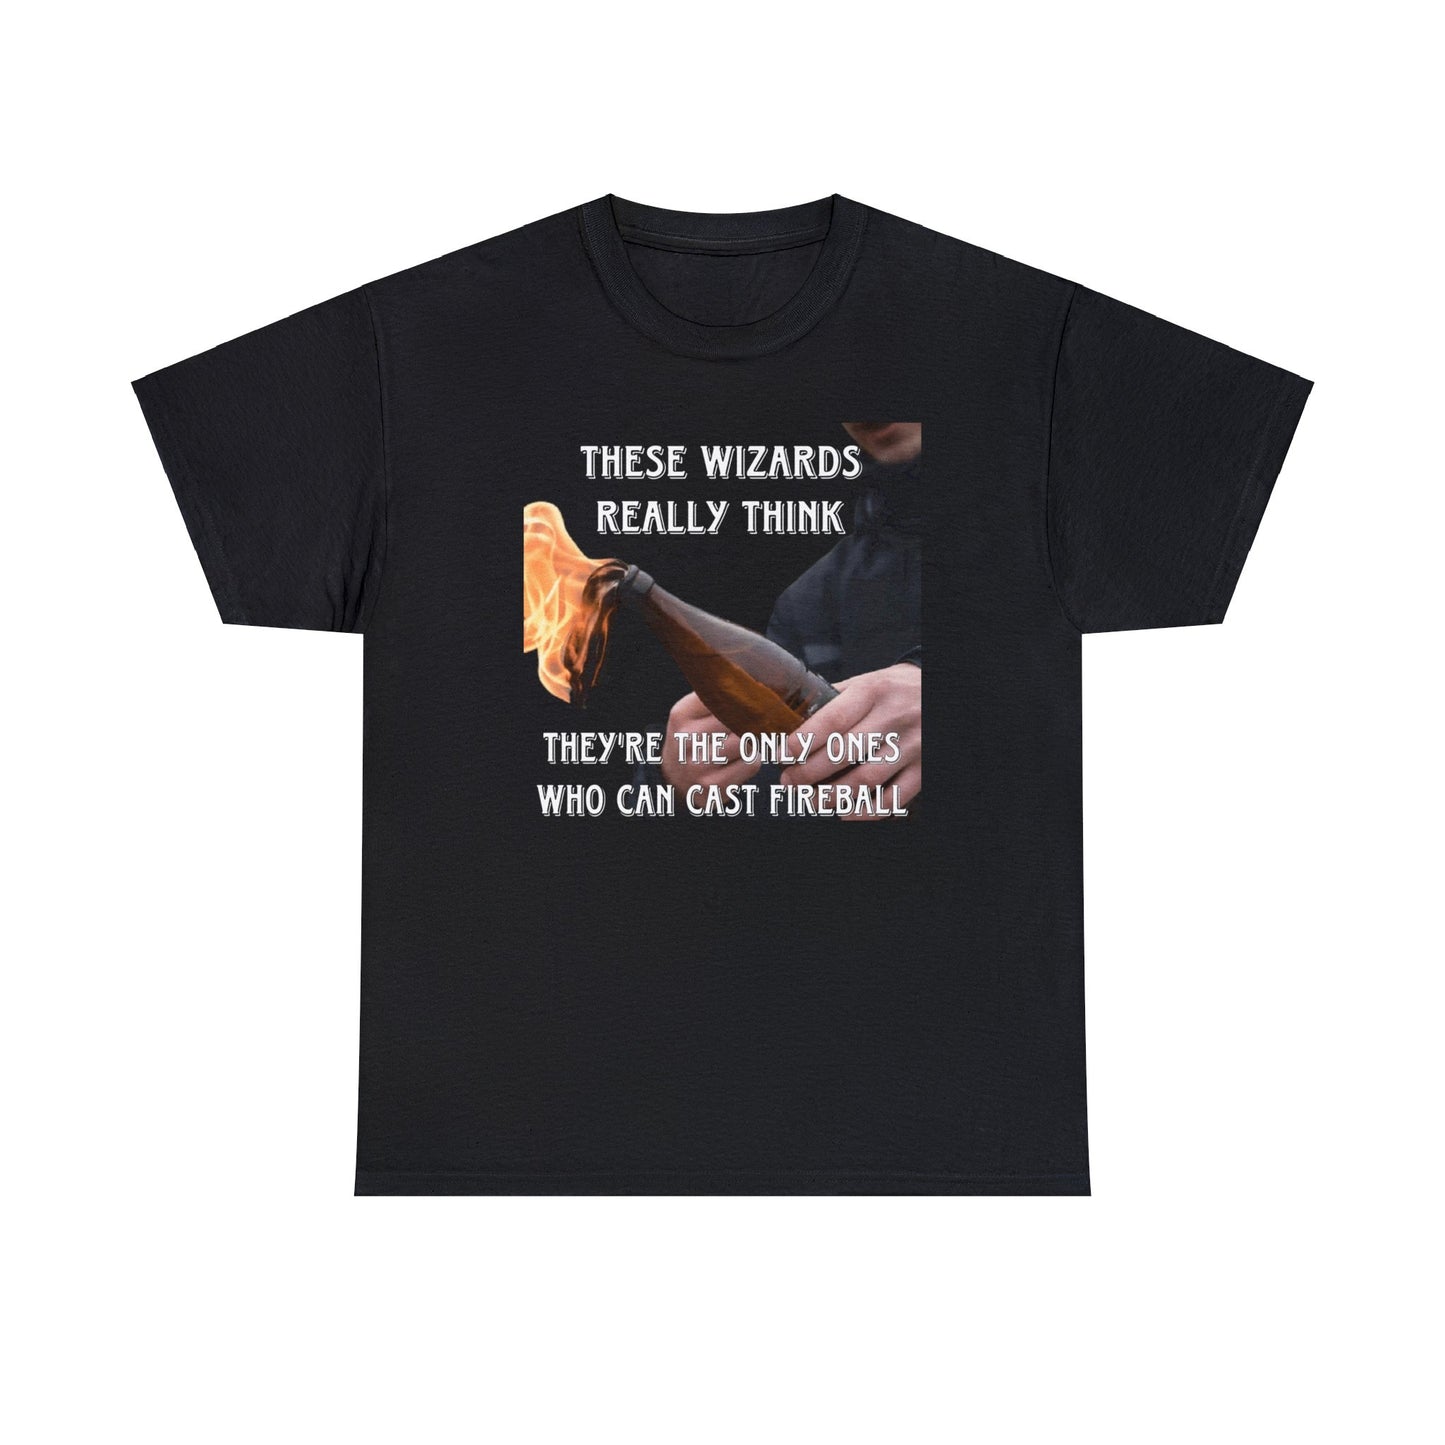 These wizards really think (not the only ones who can cast fireball) Tee